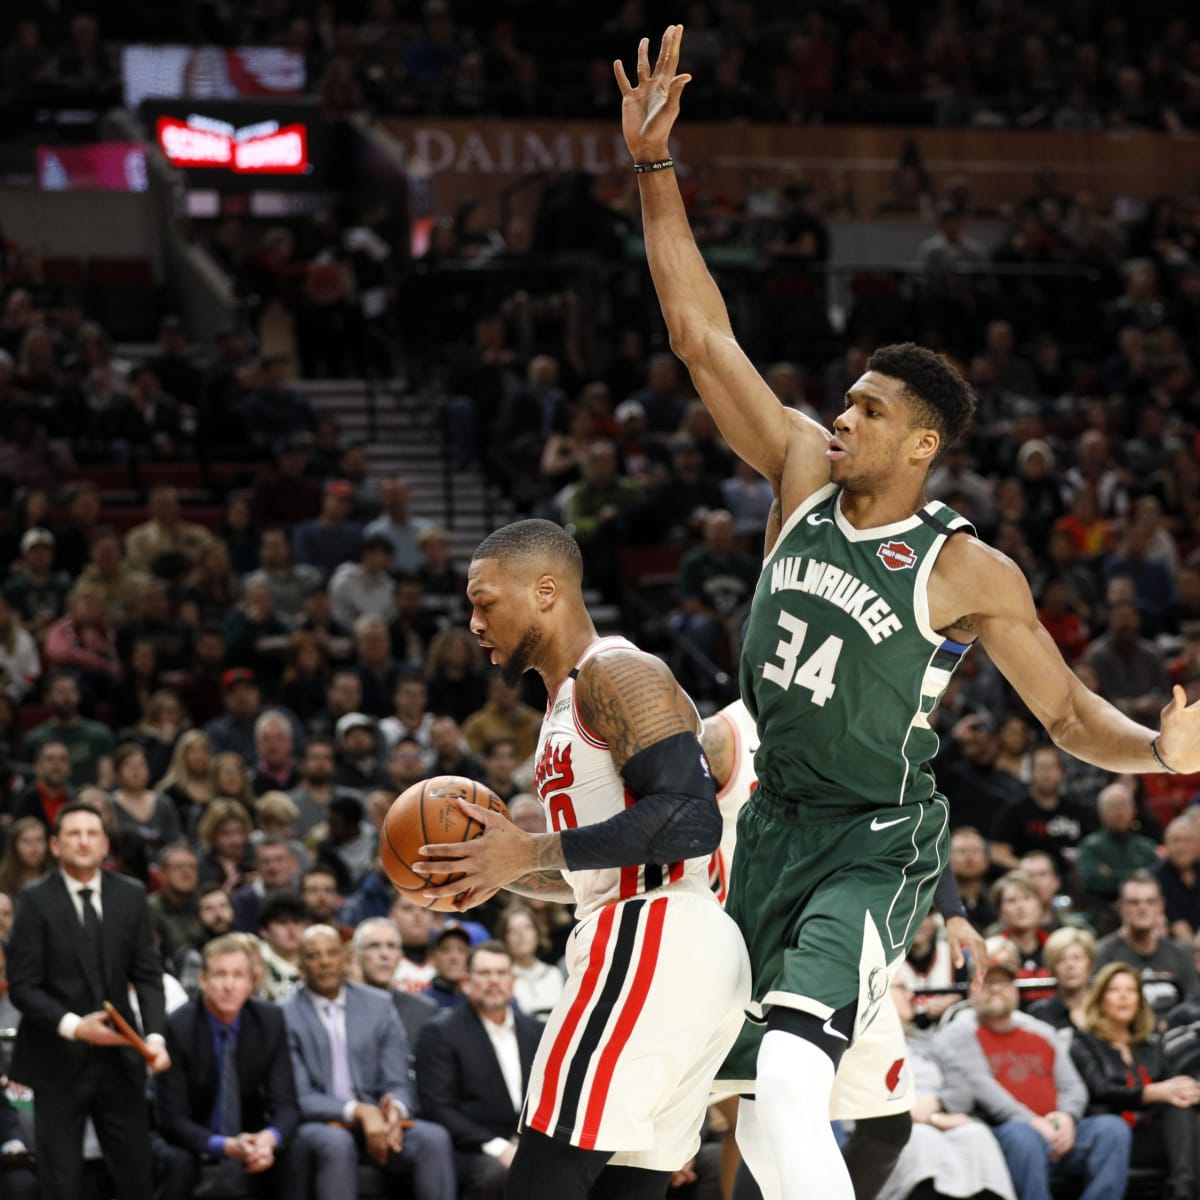 Make sure I get one of yours too” – Damian Lillard hyped after receiving  signature sneakers from new teammate Giannis Anetokounmpo - Overtime Heroics